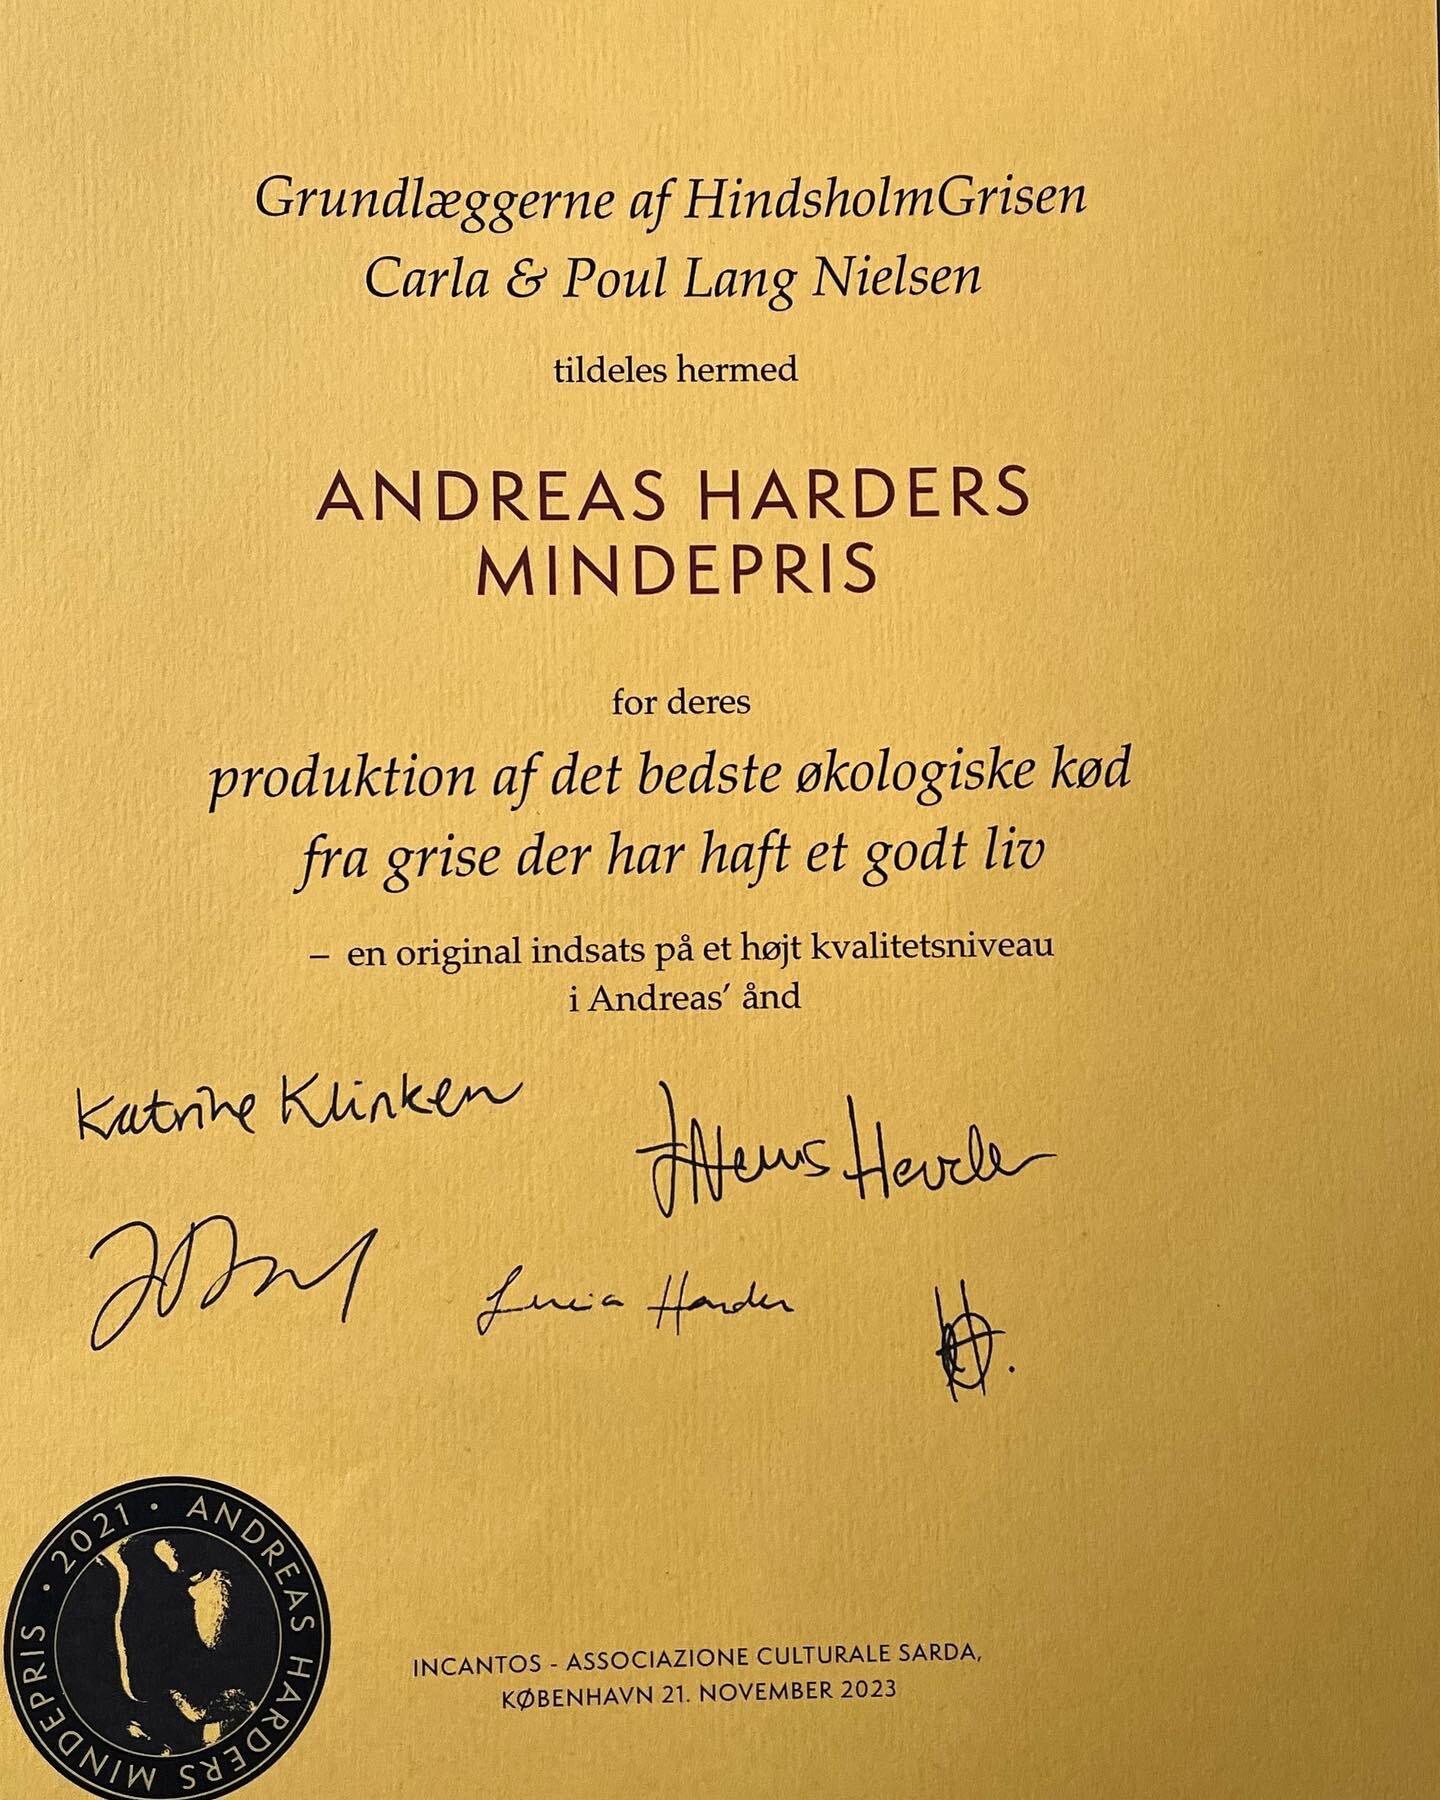 Thank you to the Andreas Harders Mindepris committee for this recognition. It is a special honour as Andreas was so helpful and encouraging at the beginning of our adventure. And congratulations to Viola Capriola!
www.andreashardersmindepris.dk
@acea